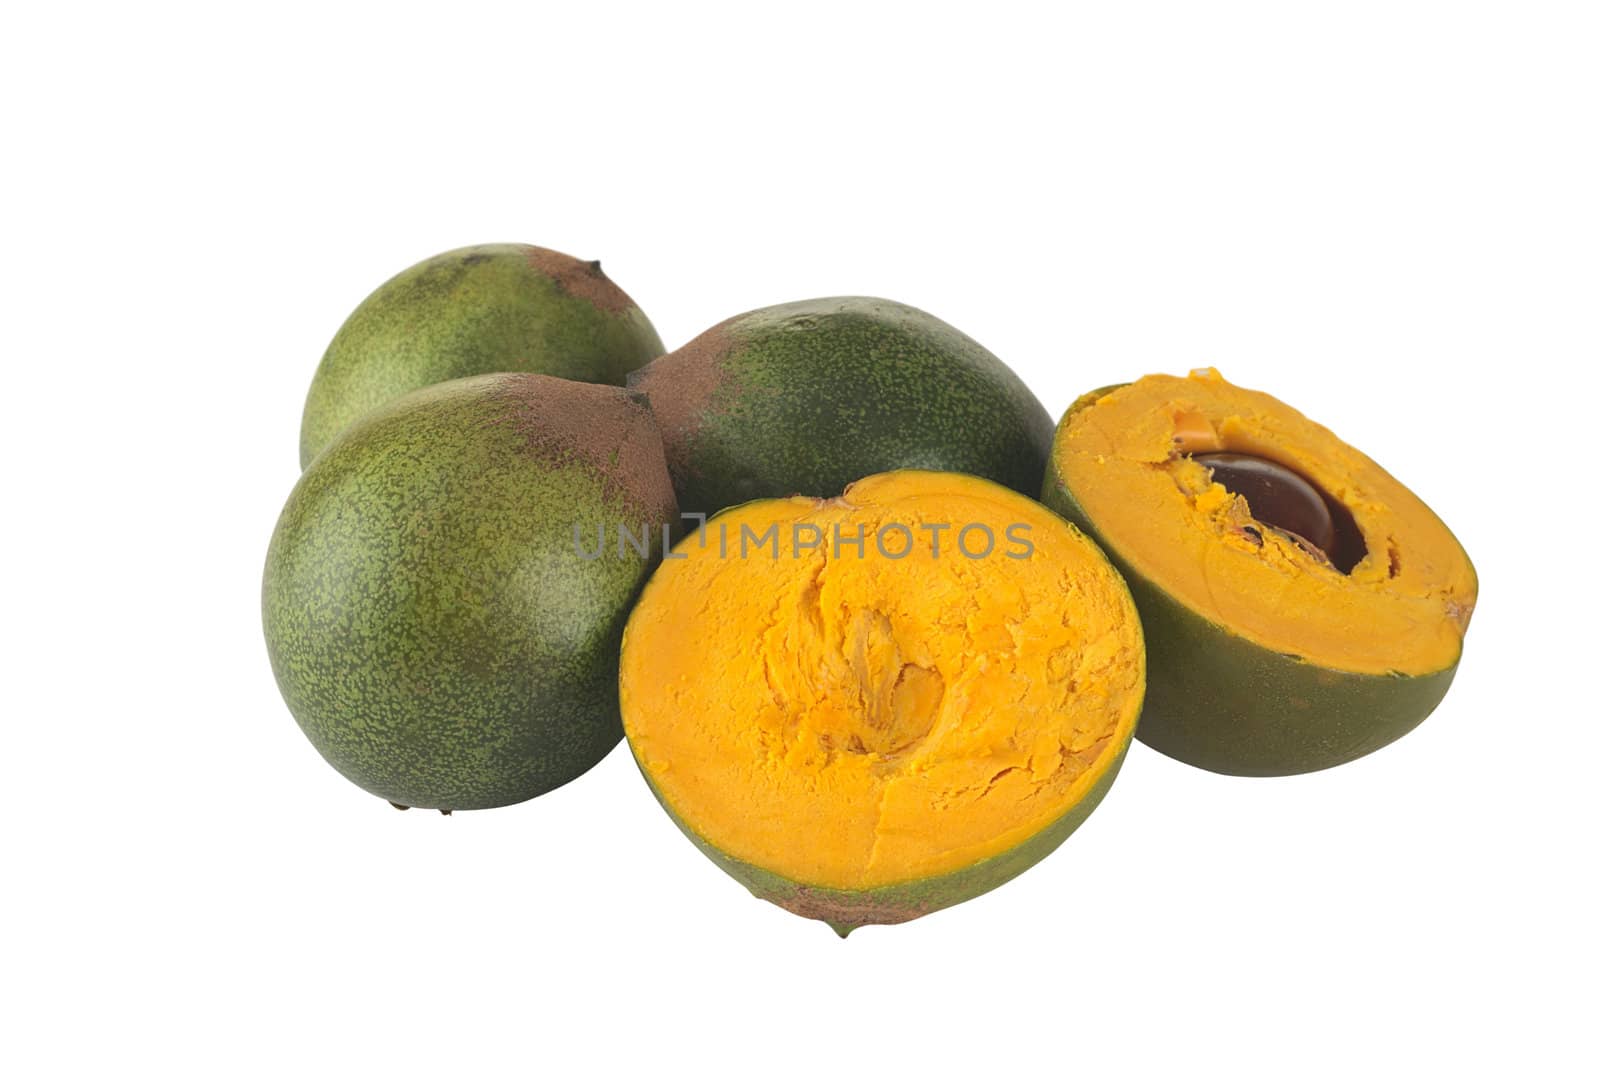 Fruit called Lucuma (lat. Pouteria lucuma) grown in the Andean region of Peru, which is very popular in Peru (Isolated on White) (Selective Focus, Focus on the front)